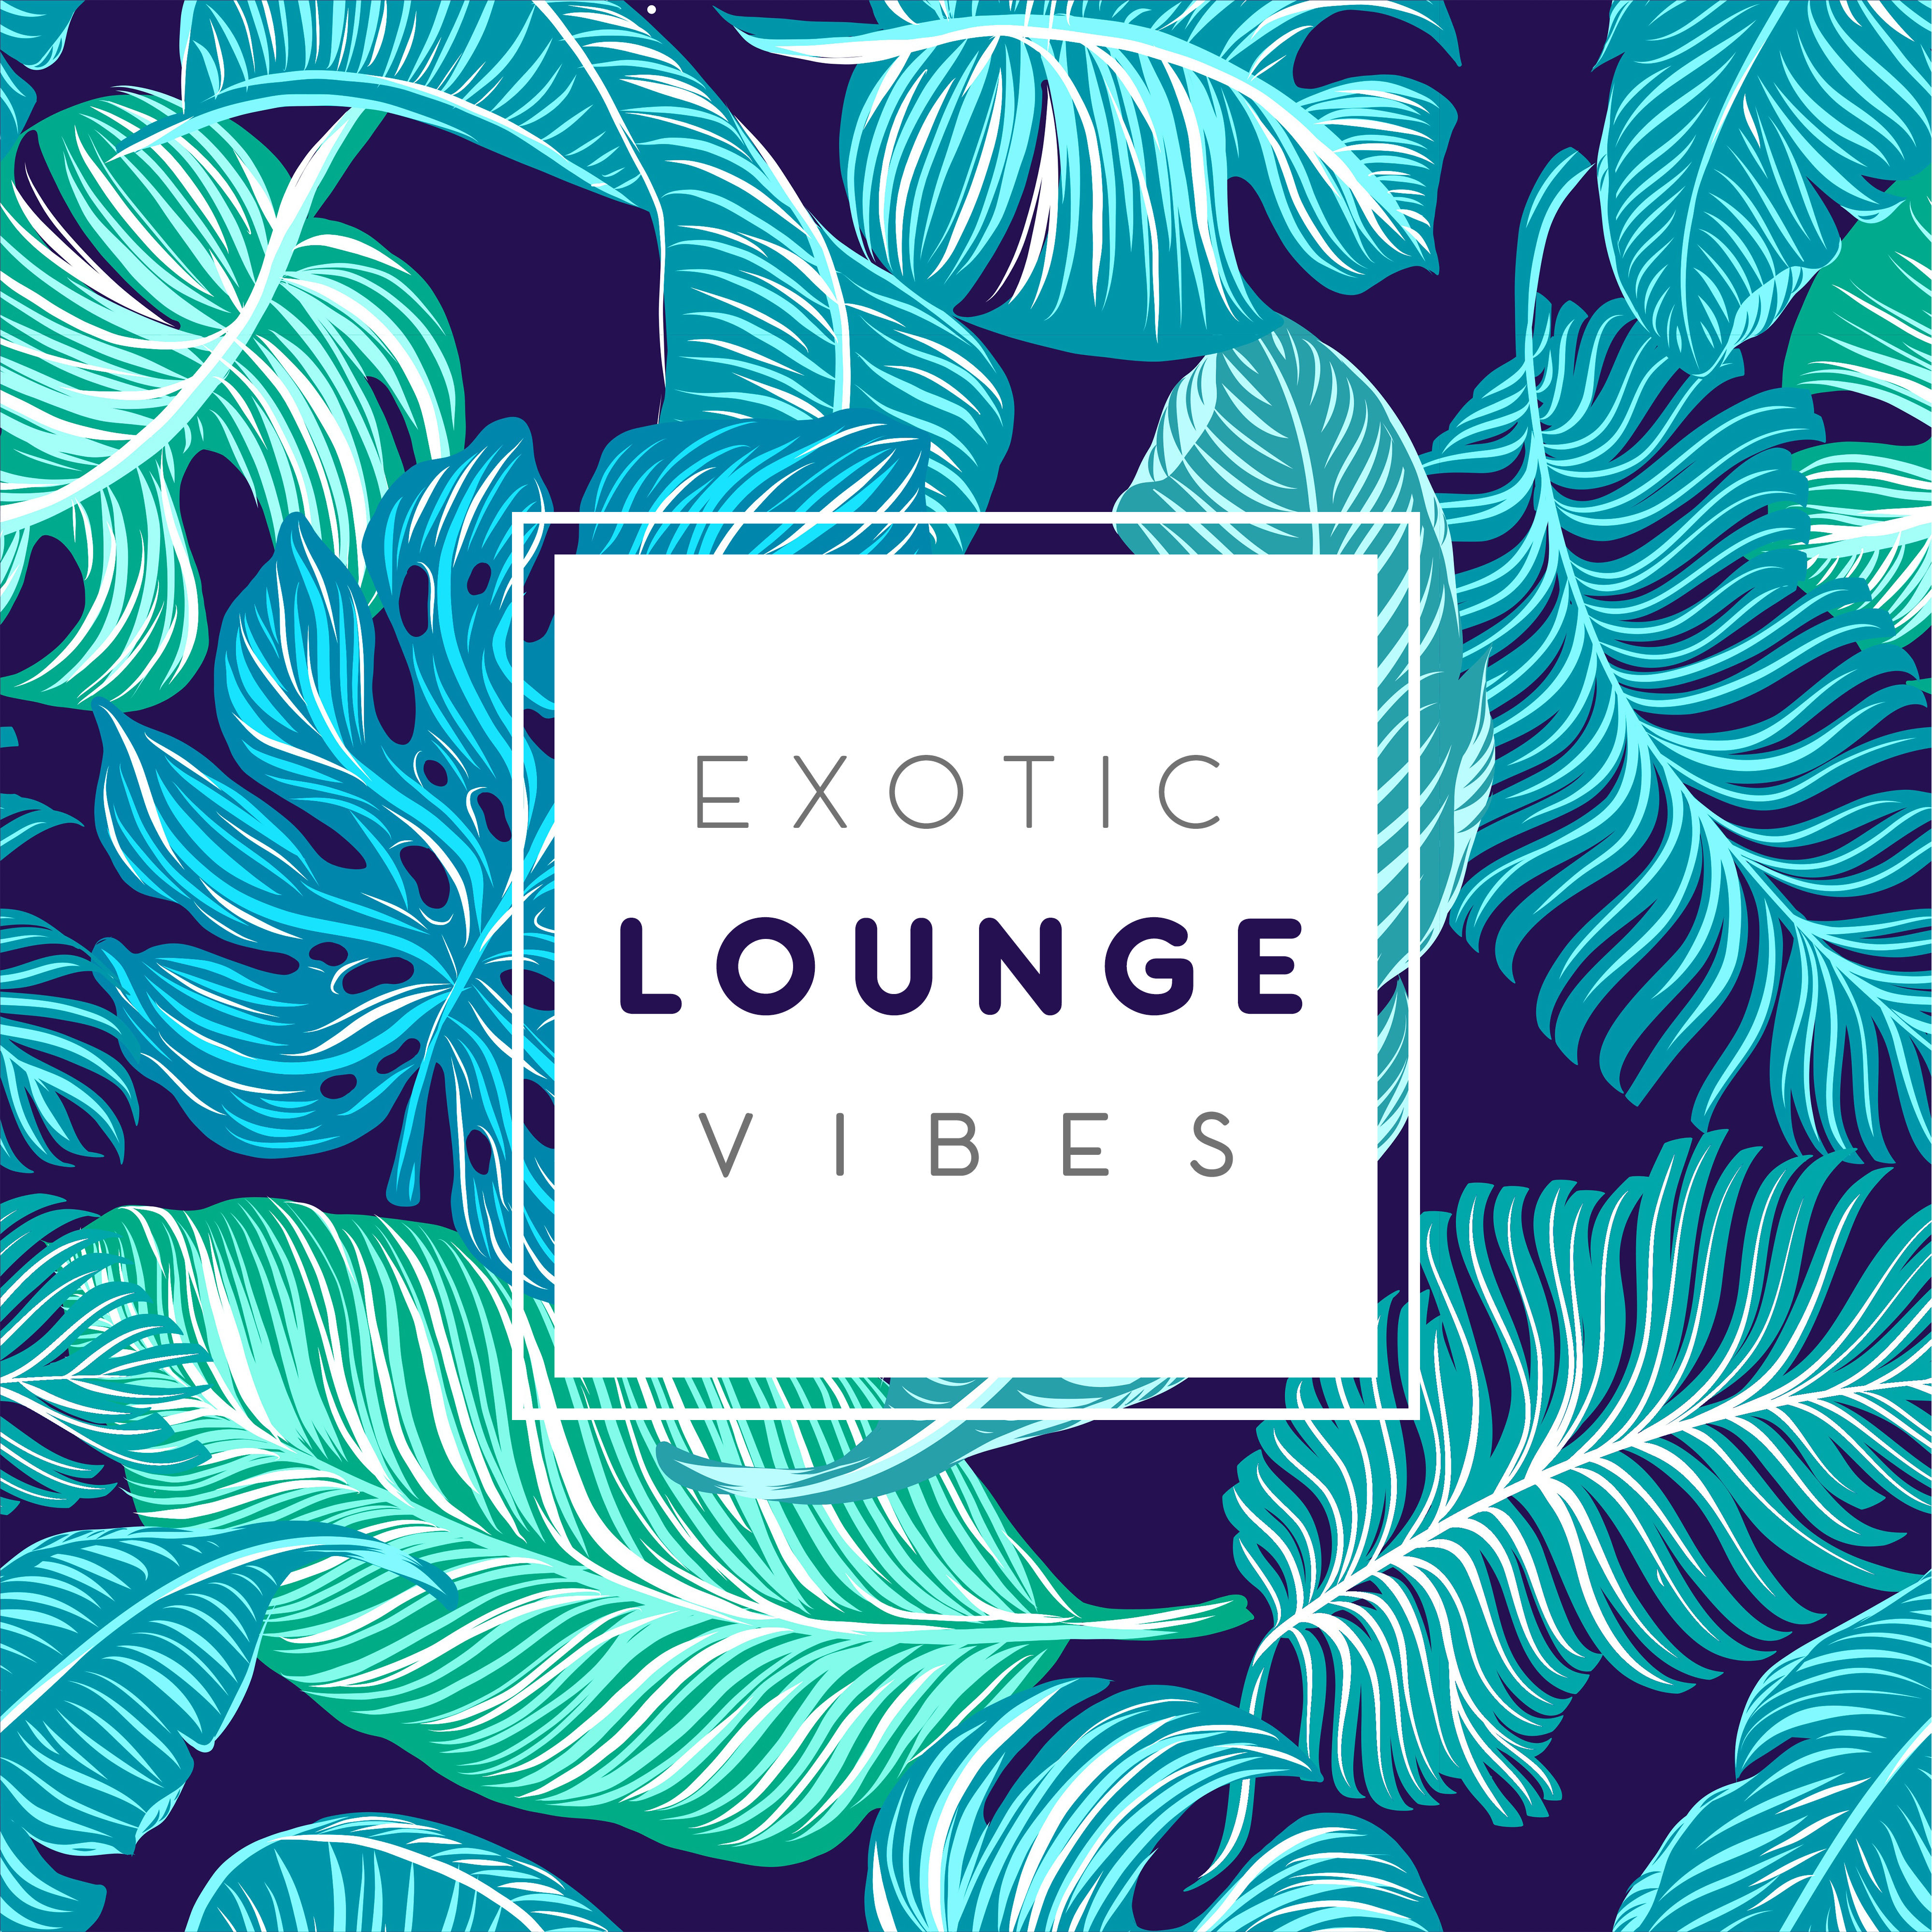 Exotic Lounge Vibes